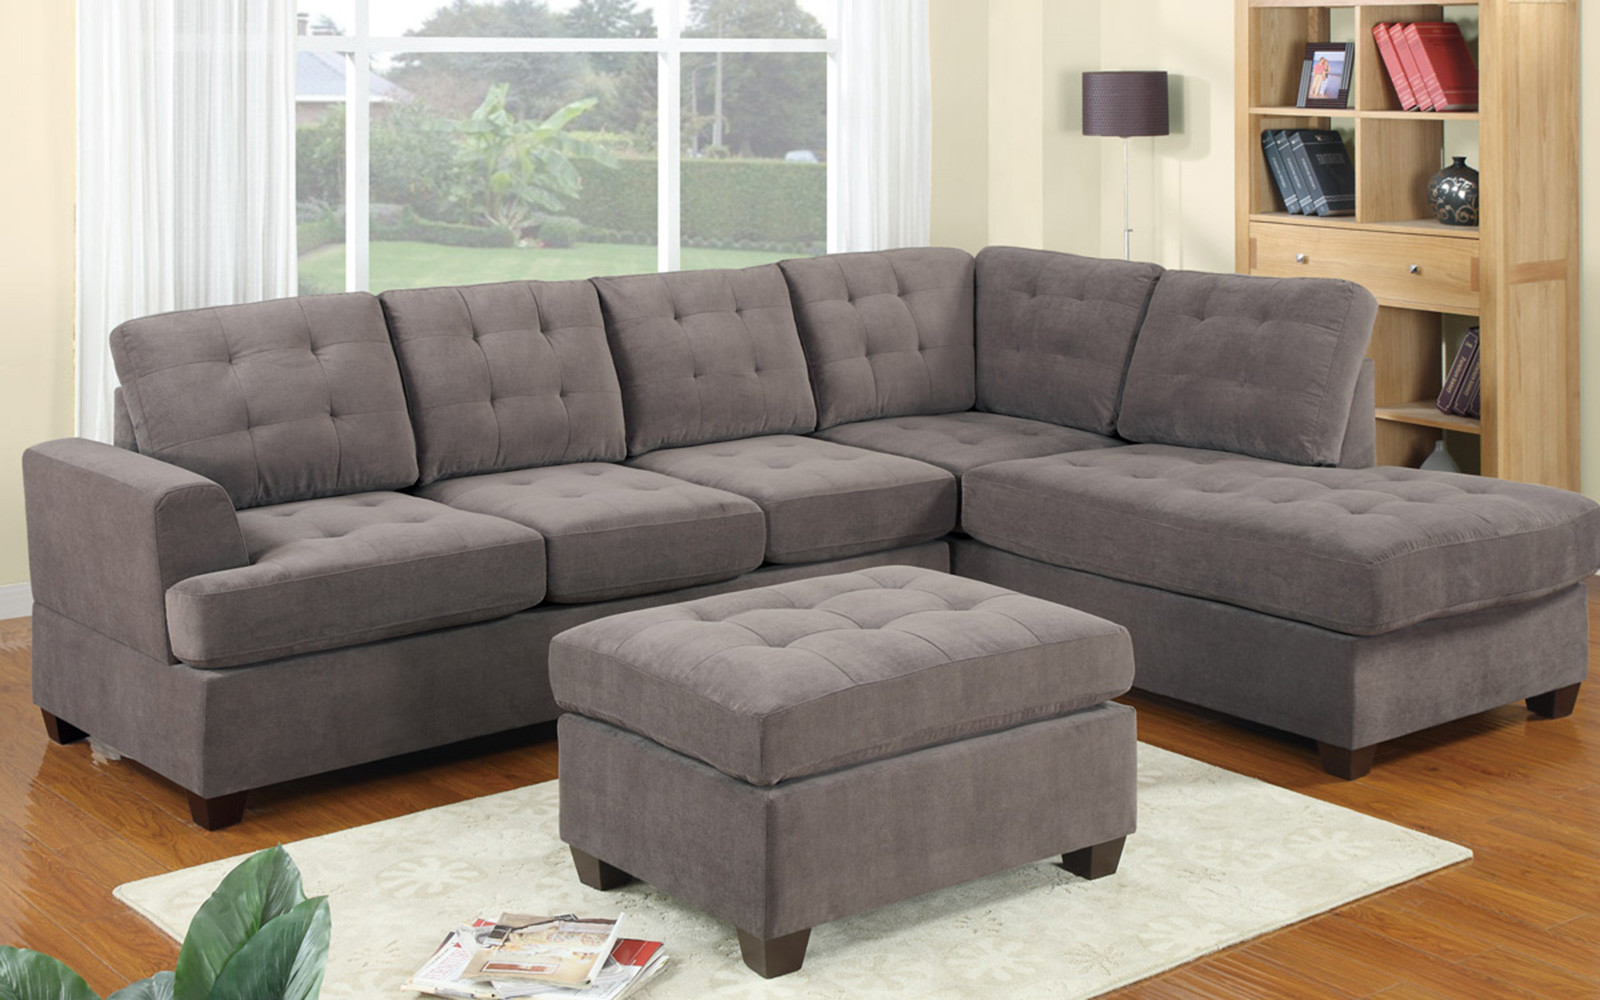 2 Piece Modern Reversible Grey Tufted Microfiber Sectional Sofa with